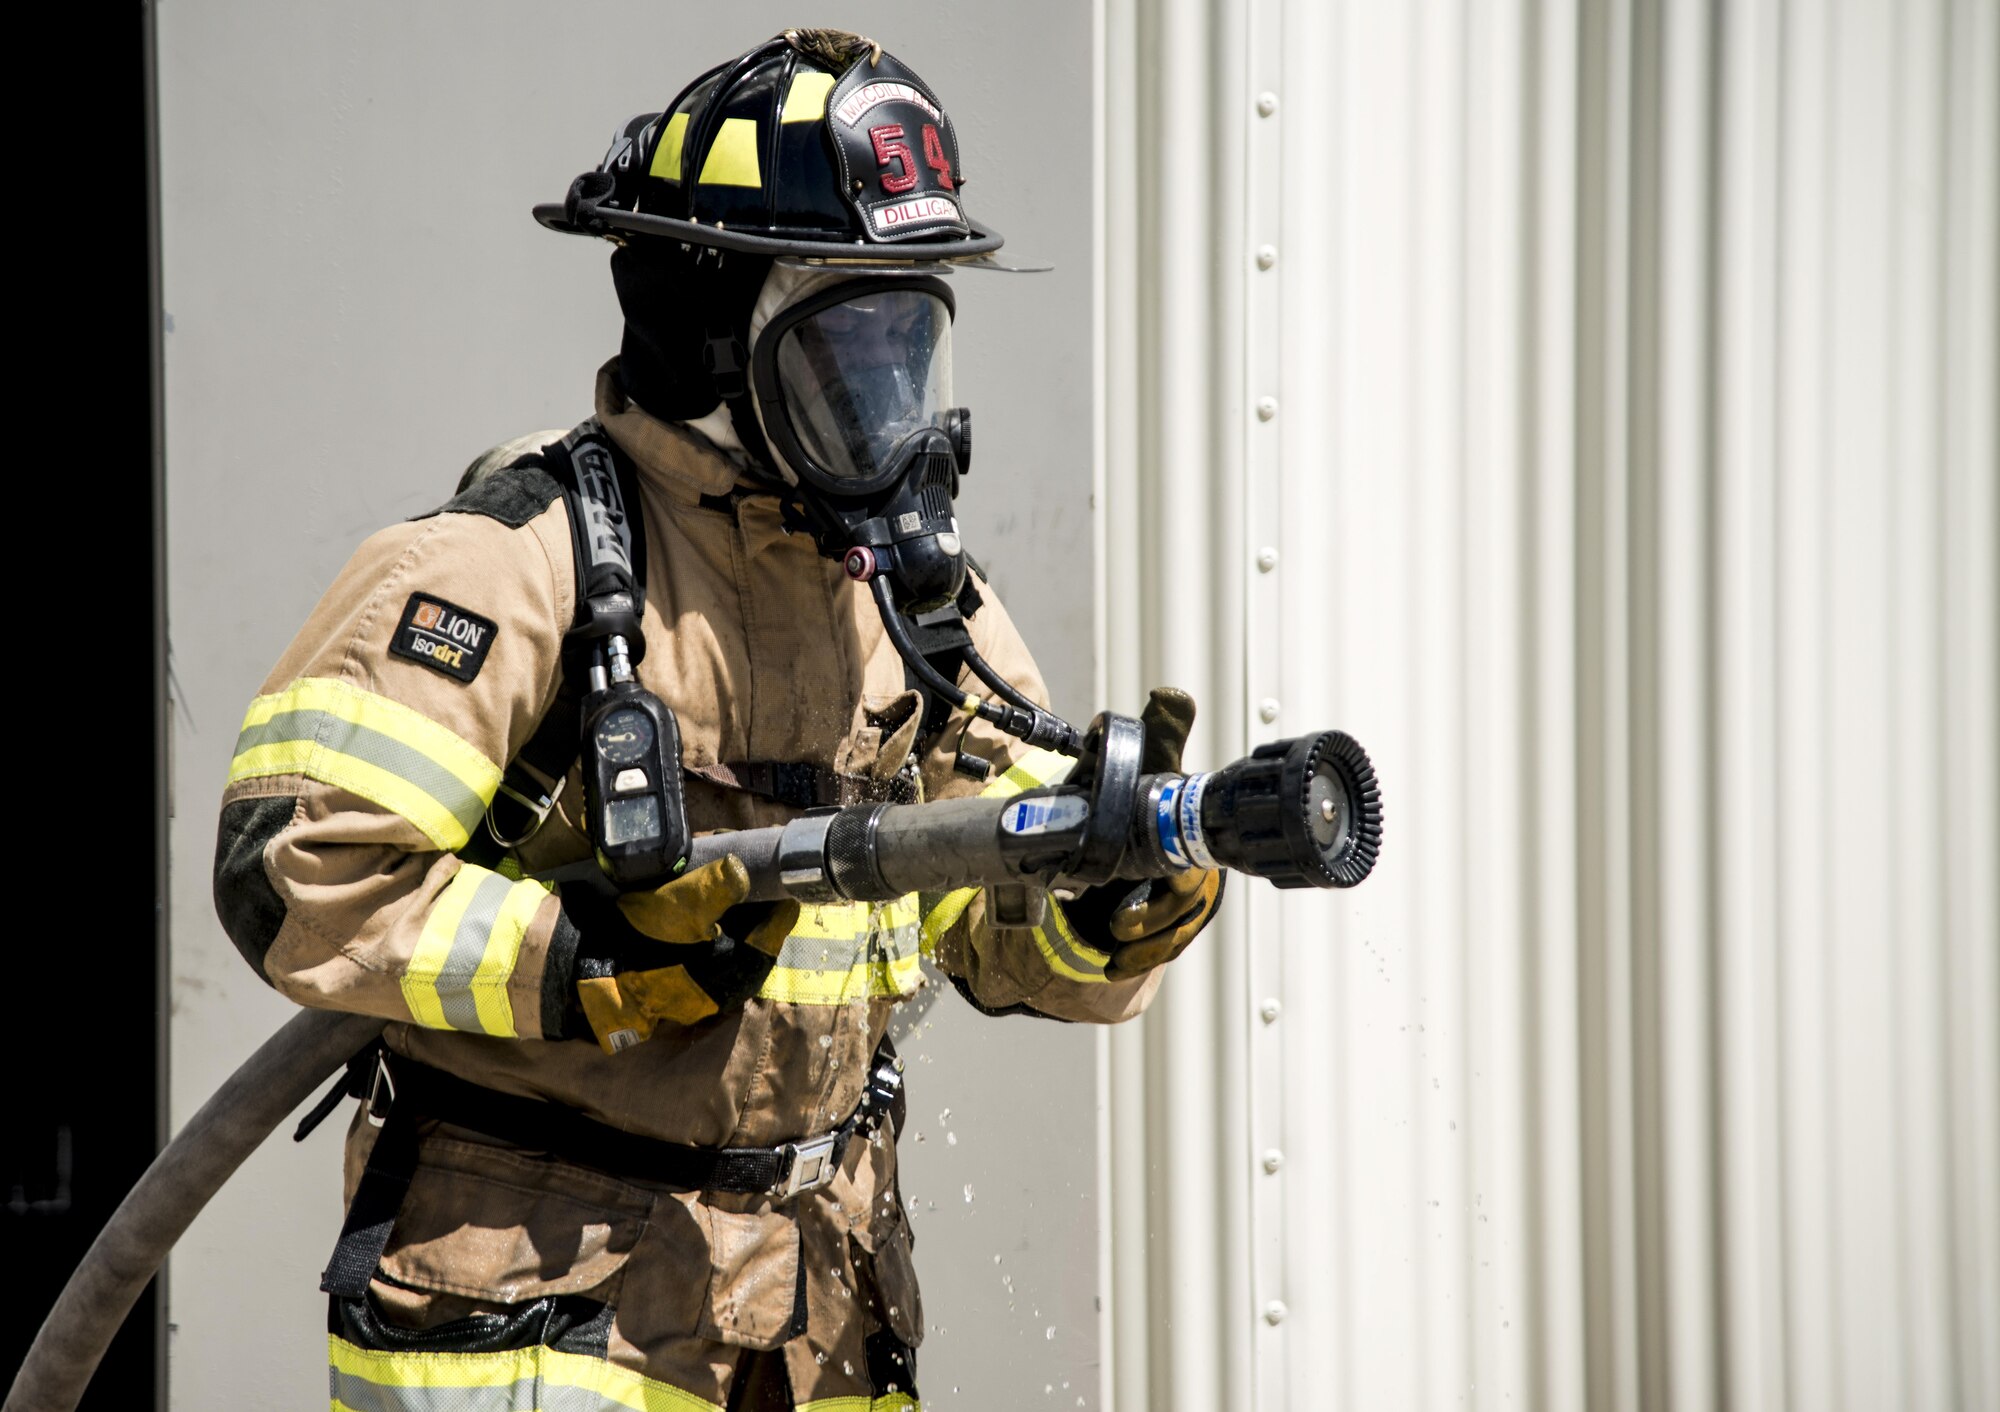 U.S. Air Force Senior Airman Montel Dilligard, a firefighter assigned to the 6th Civil Engineer Squadron, turns off a hose after the team successfully extinguished a training fire at MacDill Air Force Base, Fla., July 24, 2017. The firefighters conducted a structural, live-burn exercise to show Airmen the behavior of a fire inside a building. (U.S. Air Force photo by Airman 1st Class Adam R. Shanks)